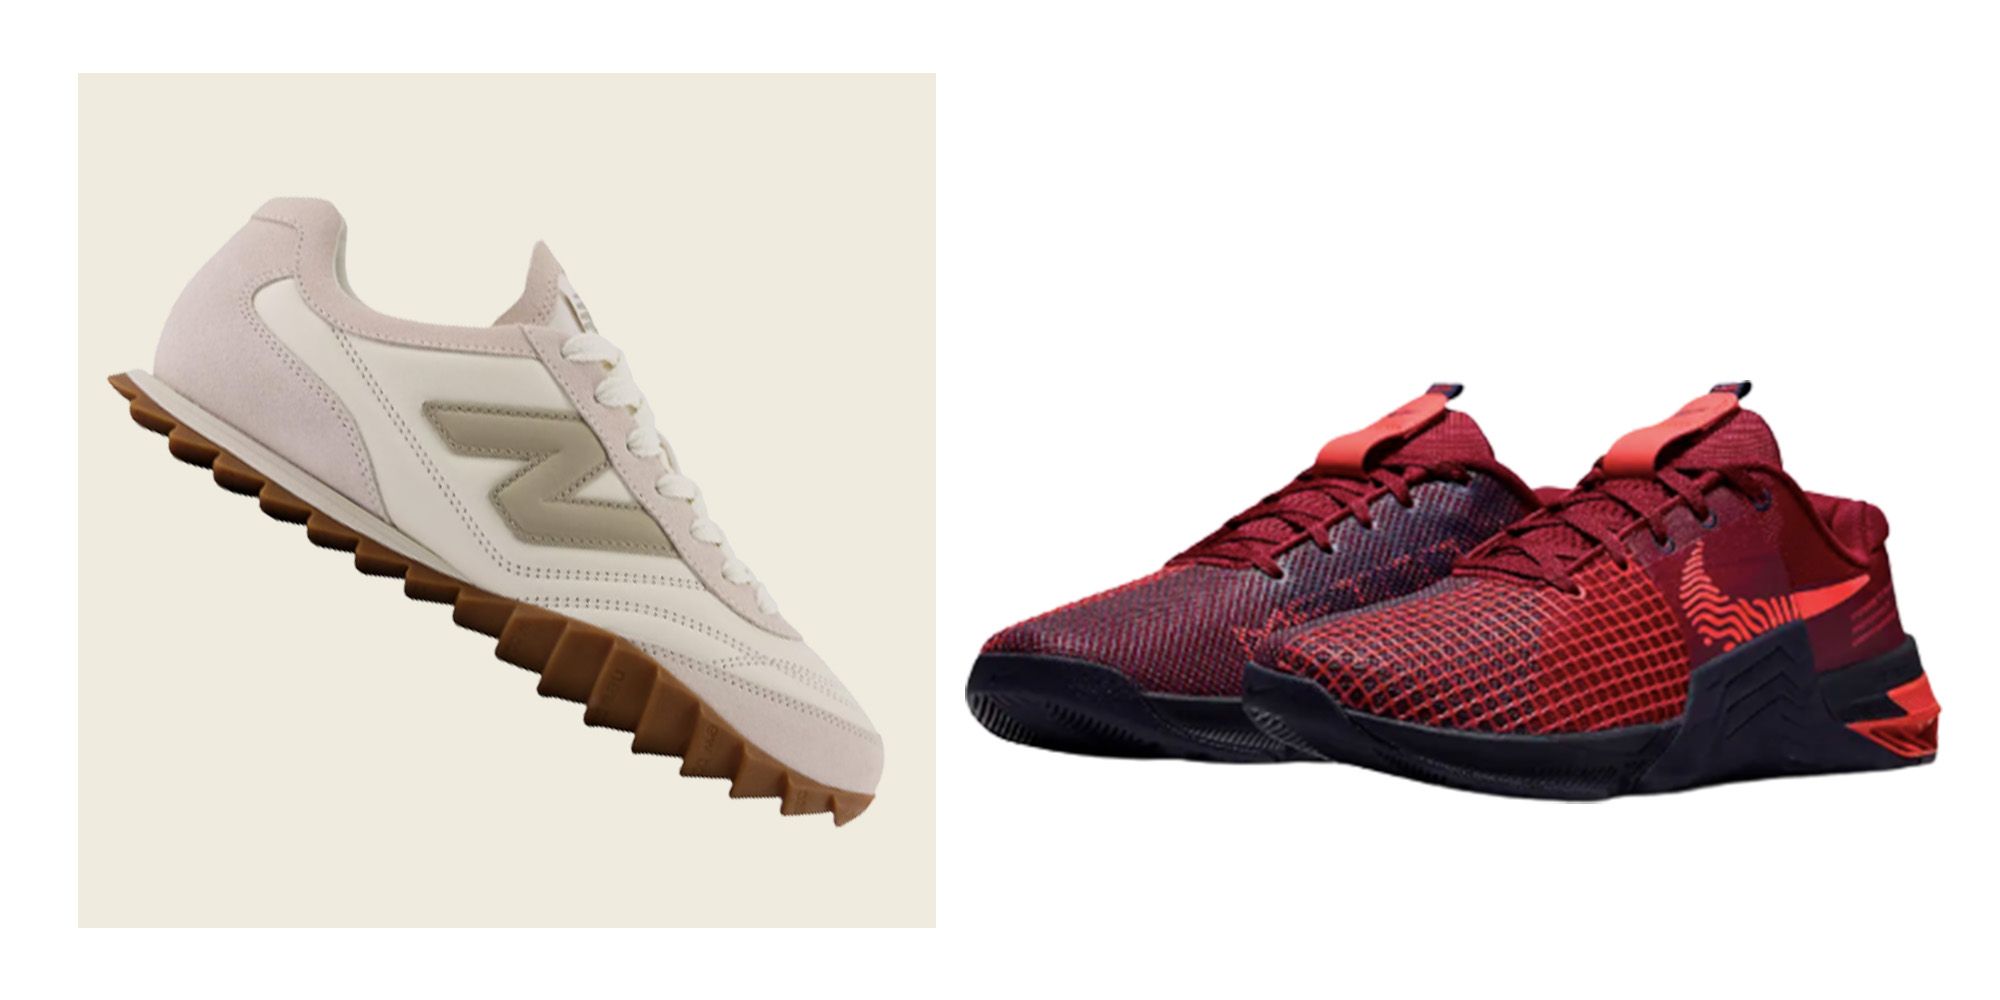 Opa Vergevingsgezind Ben depressief 25 Best Trainers For Men You Can Buy in 2023 | Cool Trainers